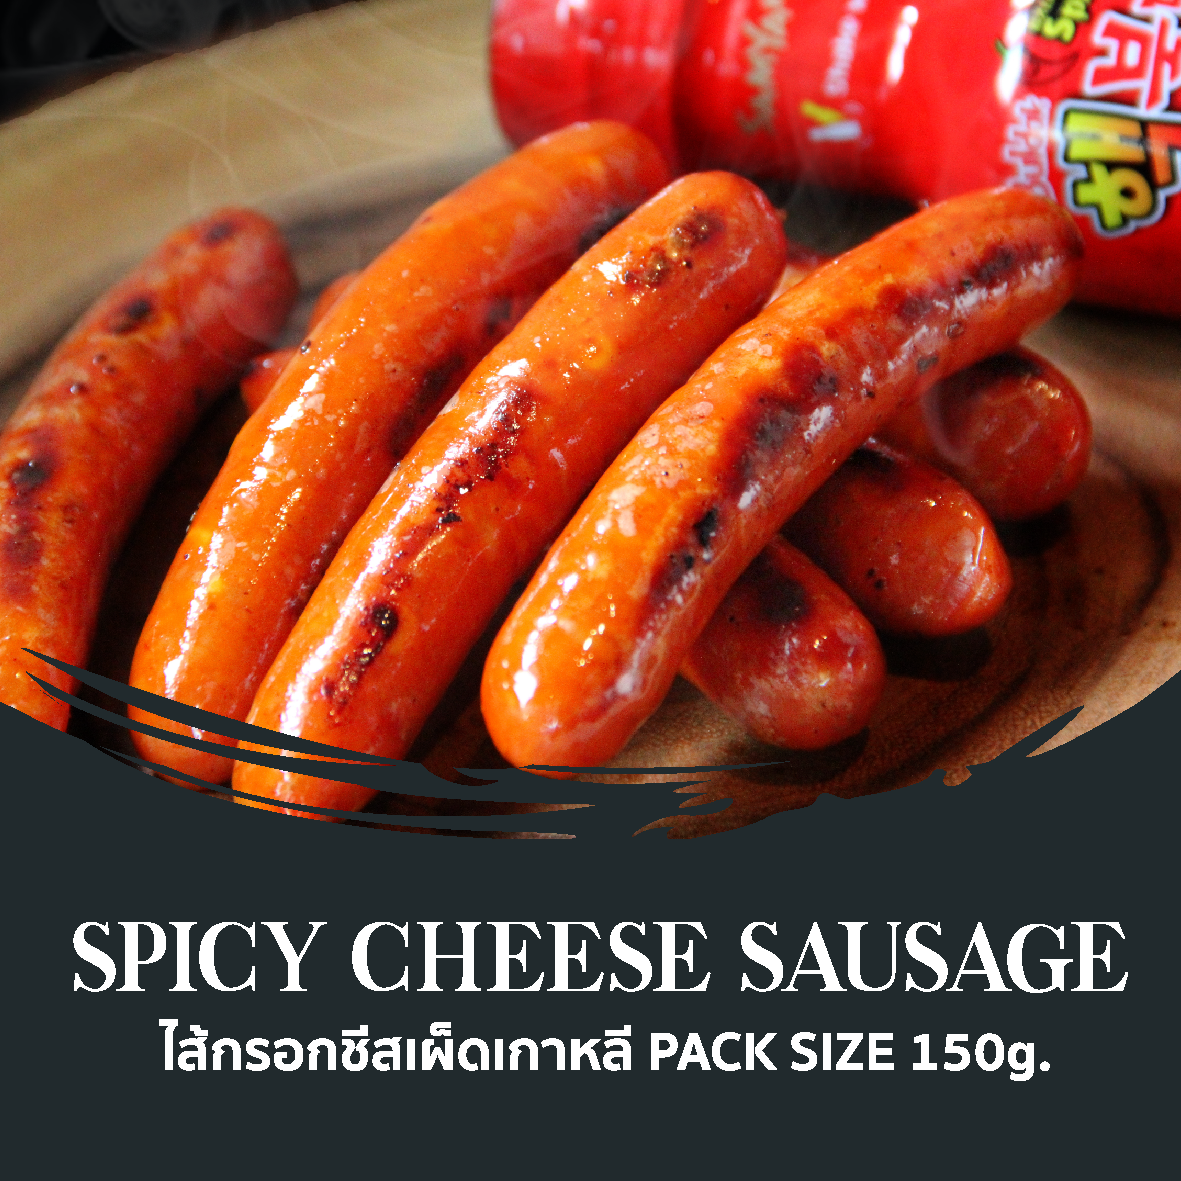 Spicy Cheese Sausage